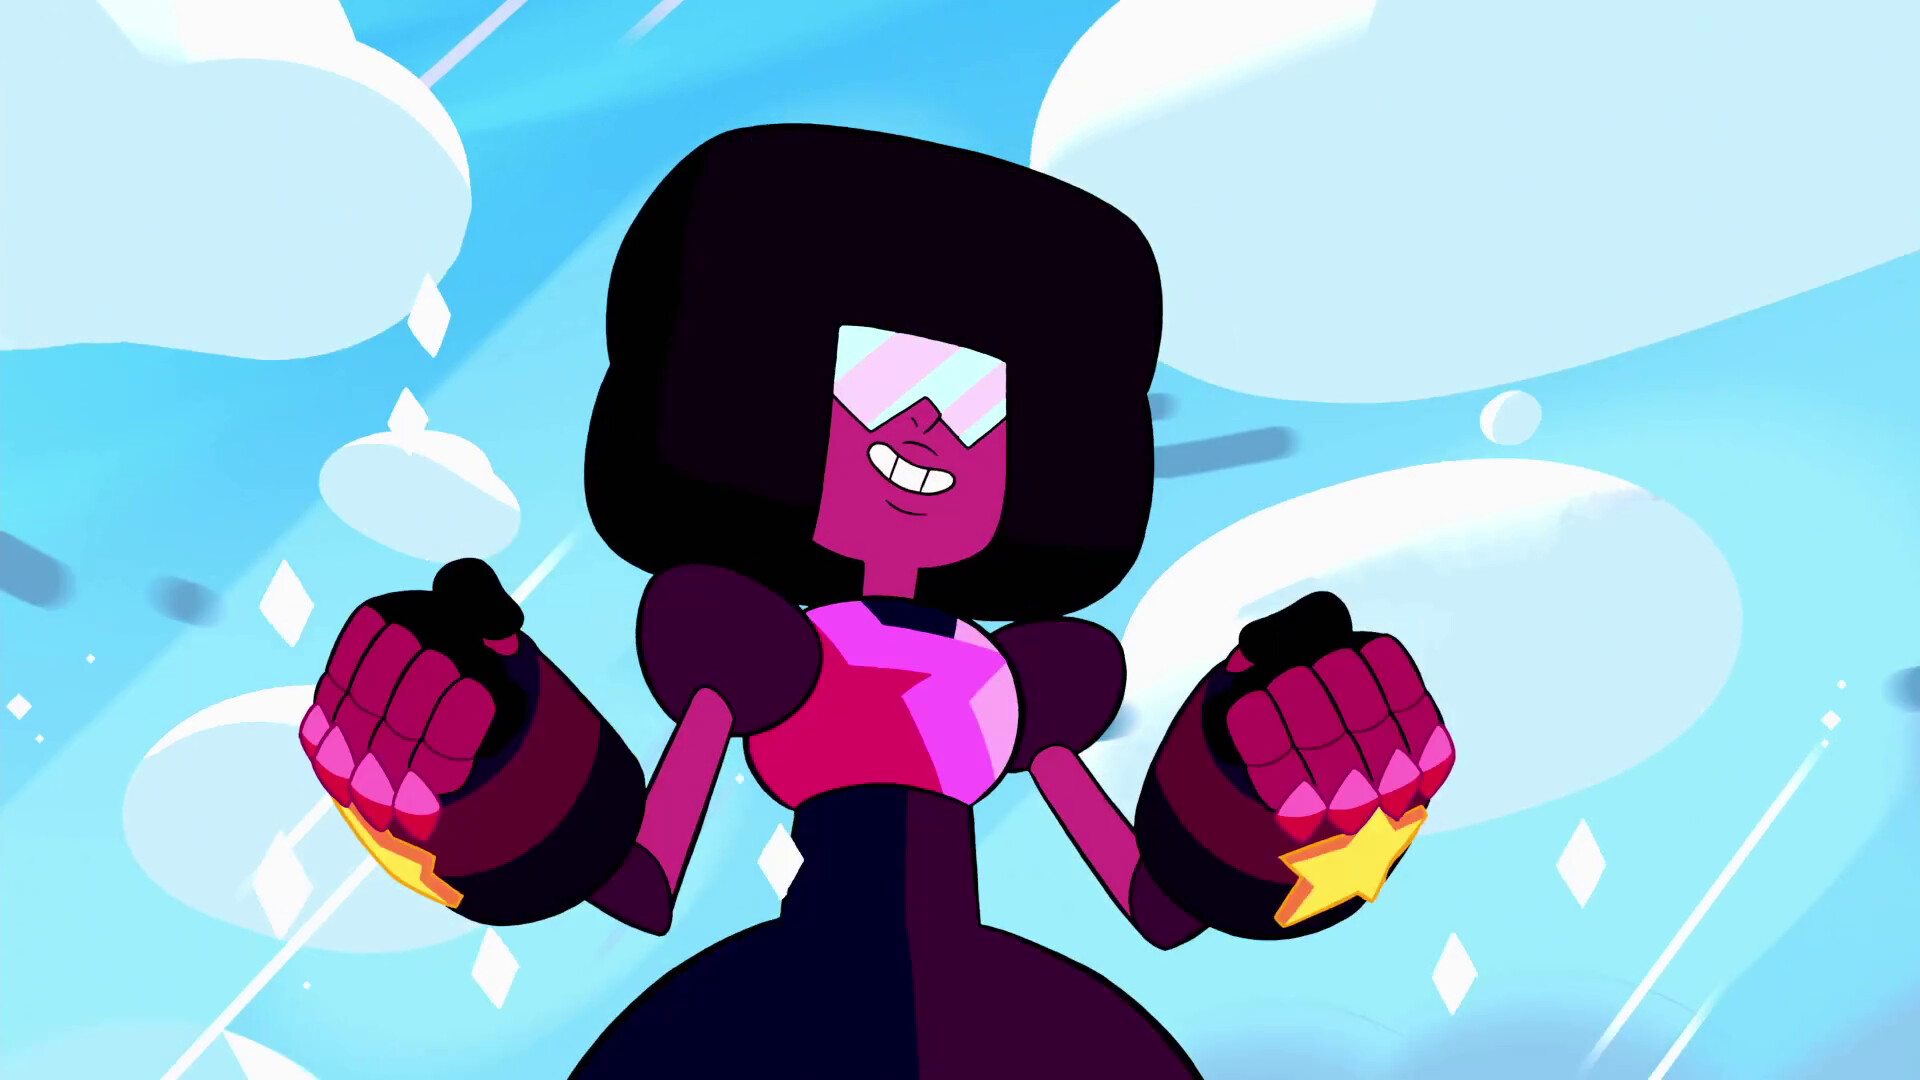 Garnet (Steven Universe): The de facto leader of the Crystal Gems, The leading character, Cartoon Network animated TV series. 1920x1080 Full HD Wallpaper.